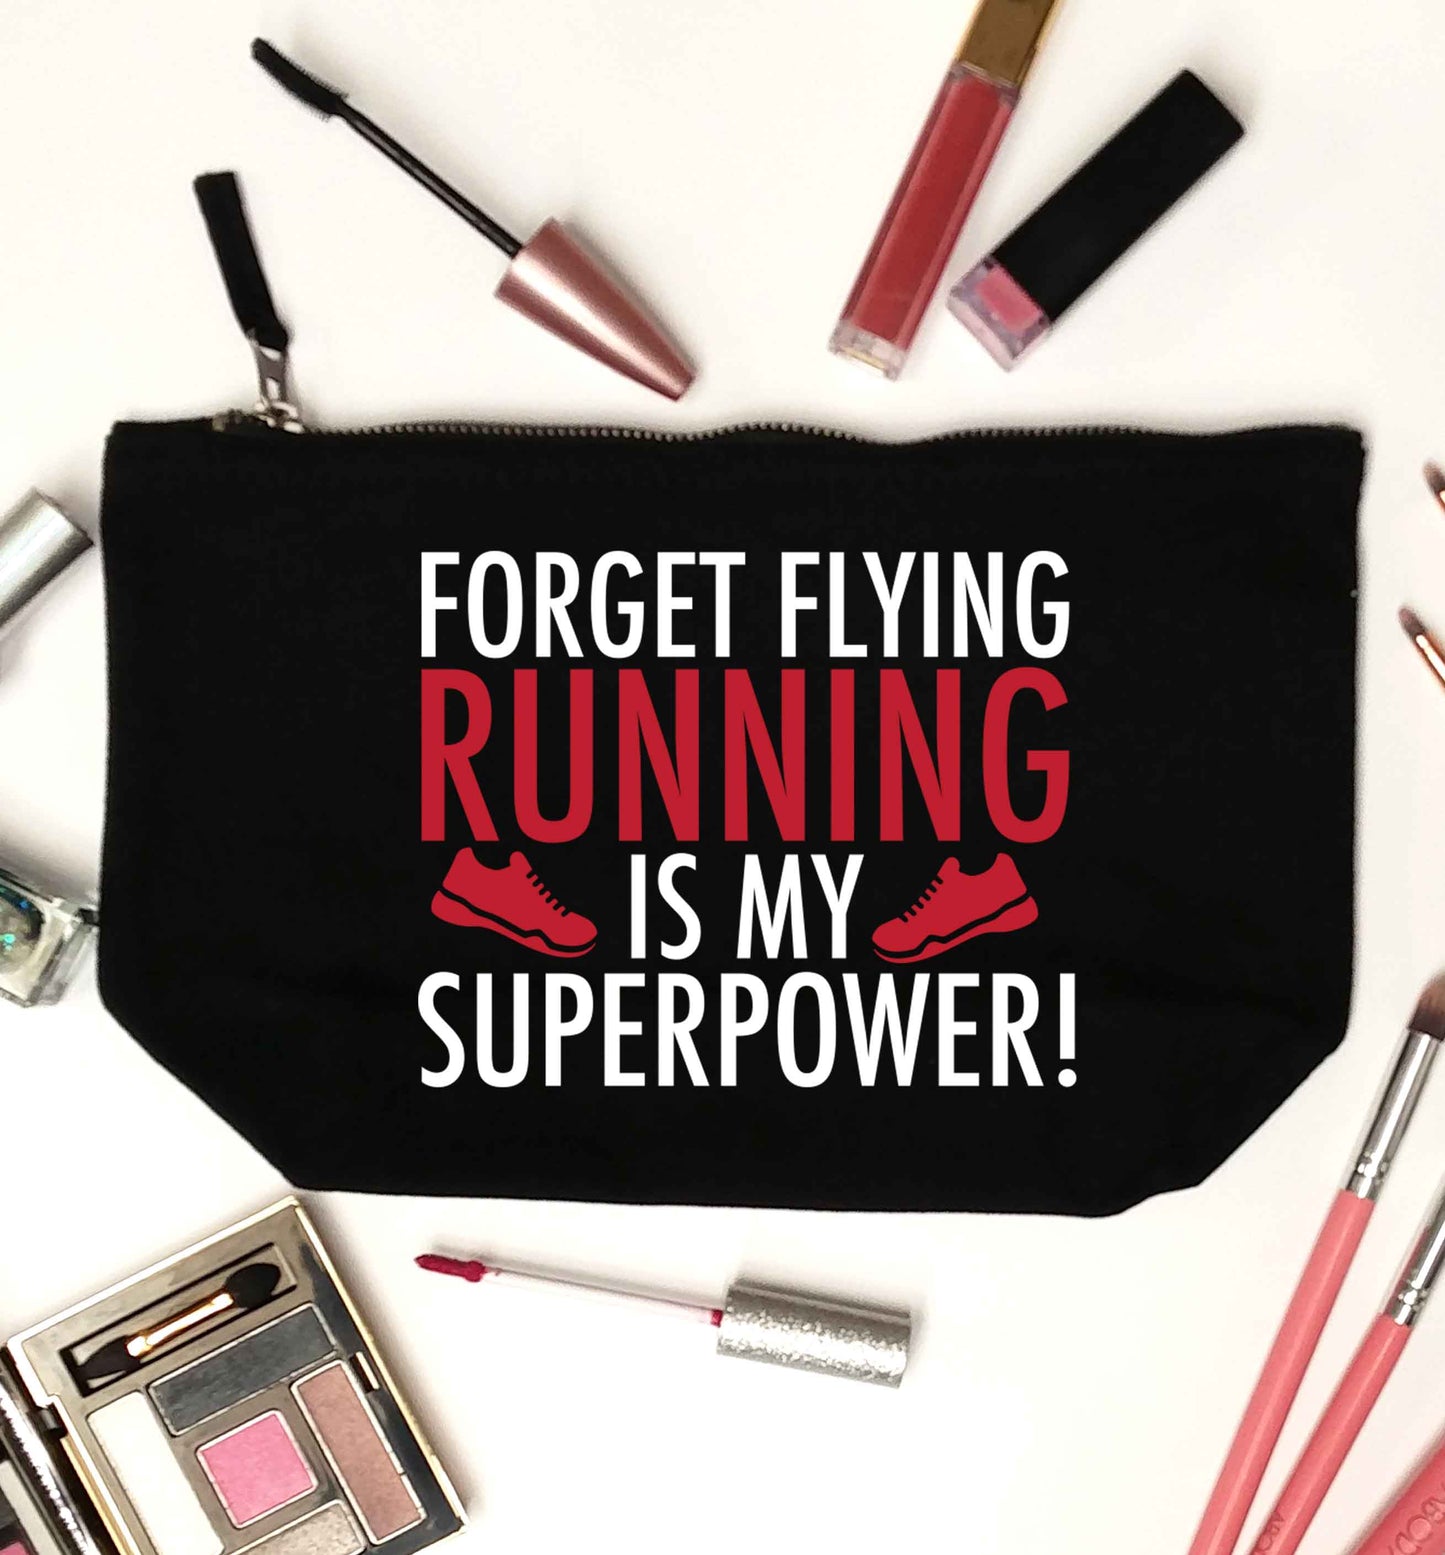 Forget flying running is my superpower black makeup bag